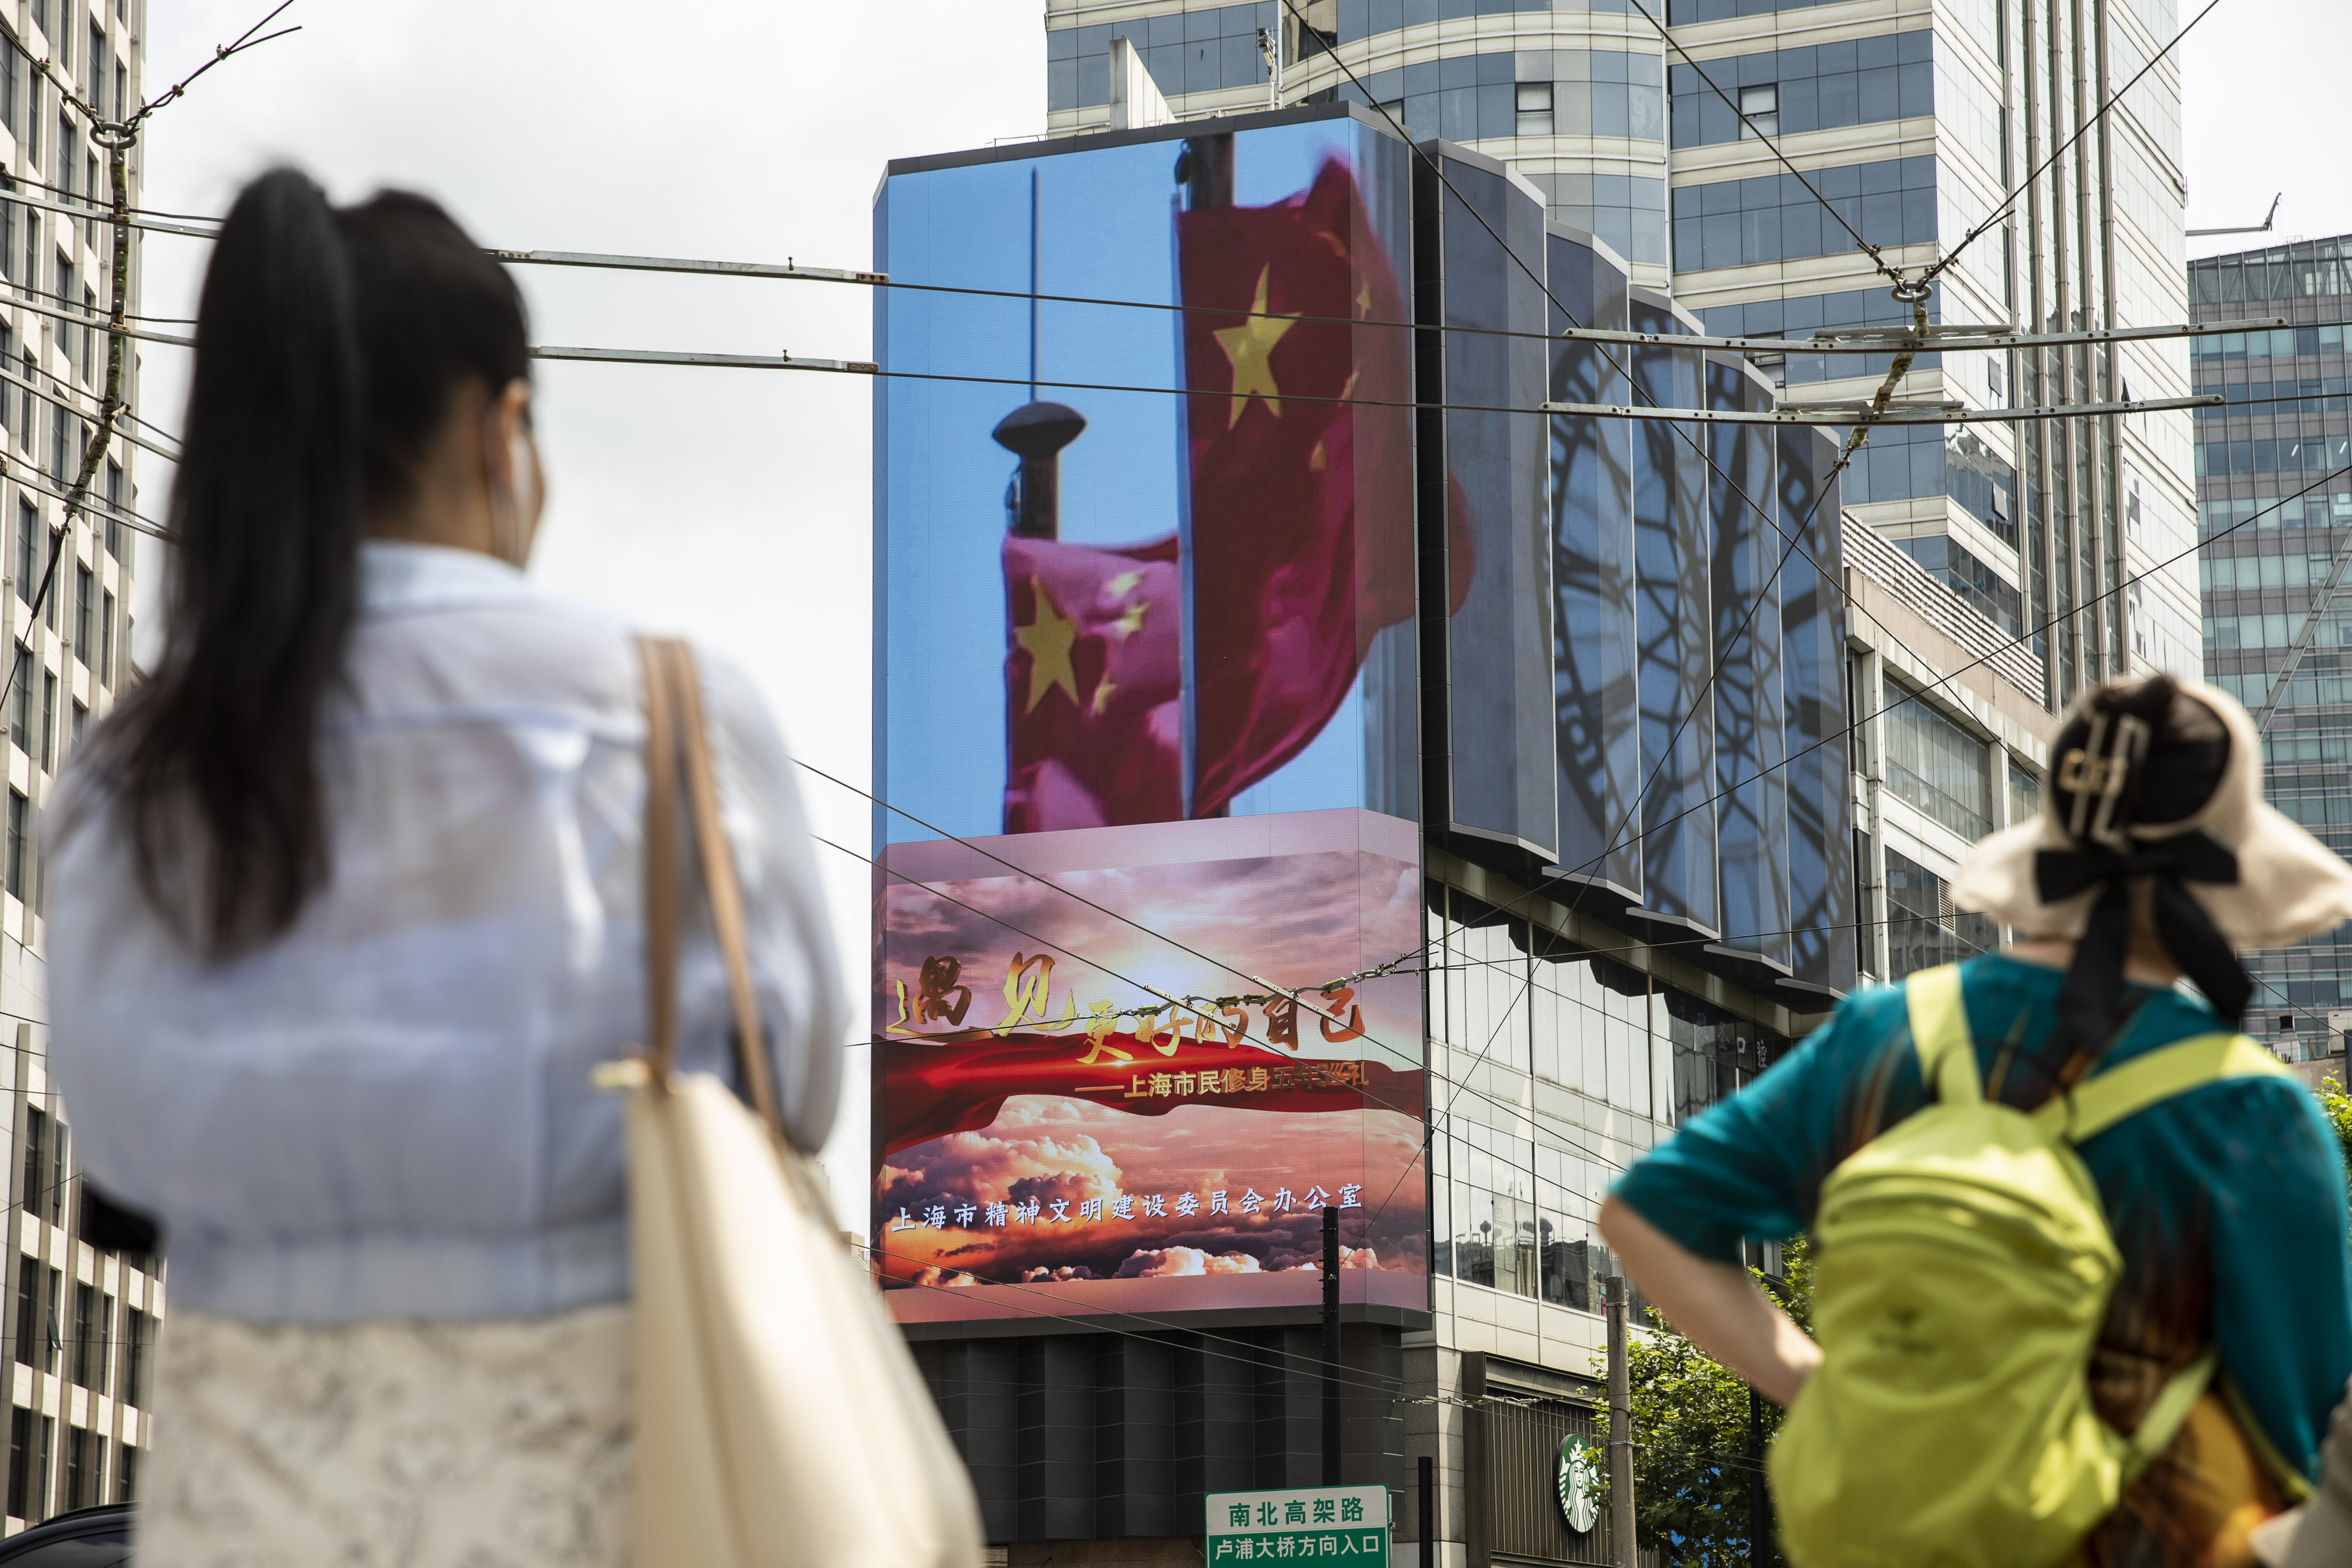 President Xi Jinping’s “common prosperity” campaign aims to reduce China’s yawning wealth gap. Photo: Bloomberg